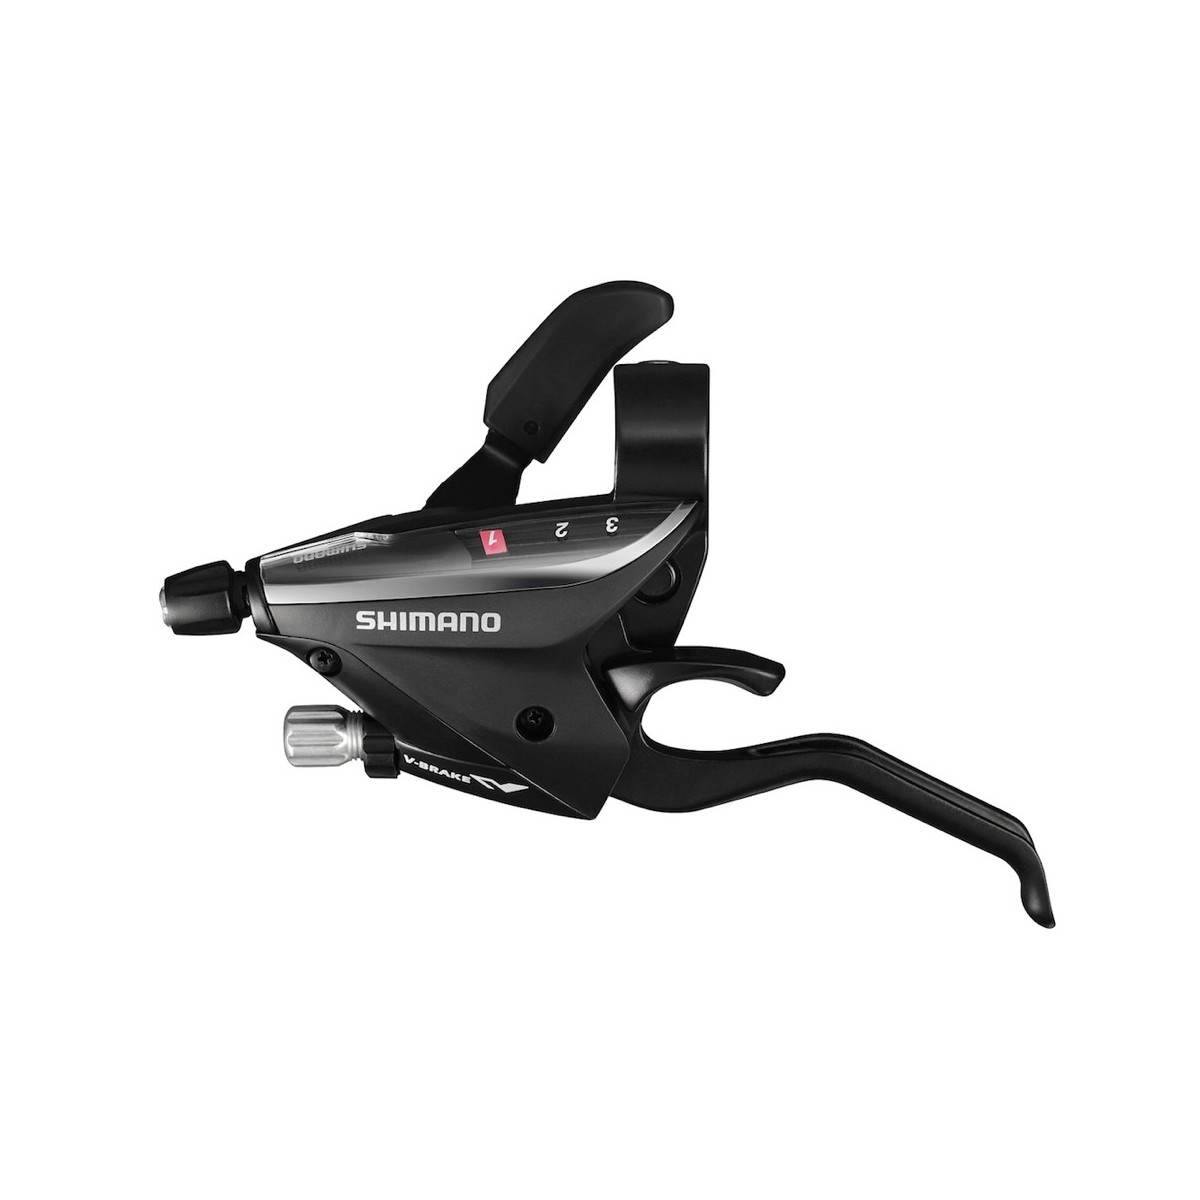 Shimano Acera ST-EF65 3-speed shifters